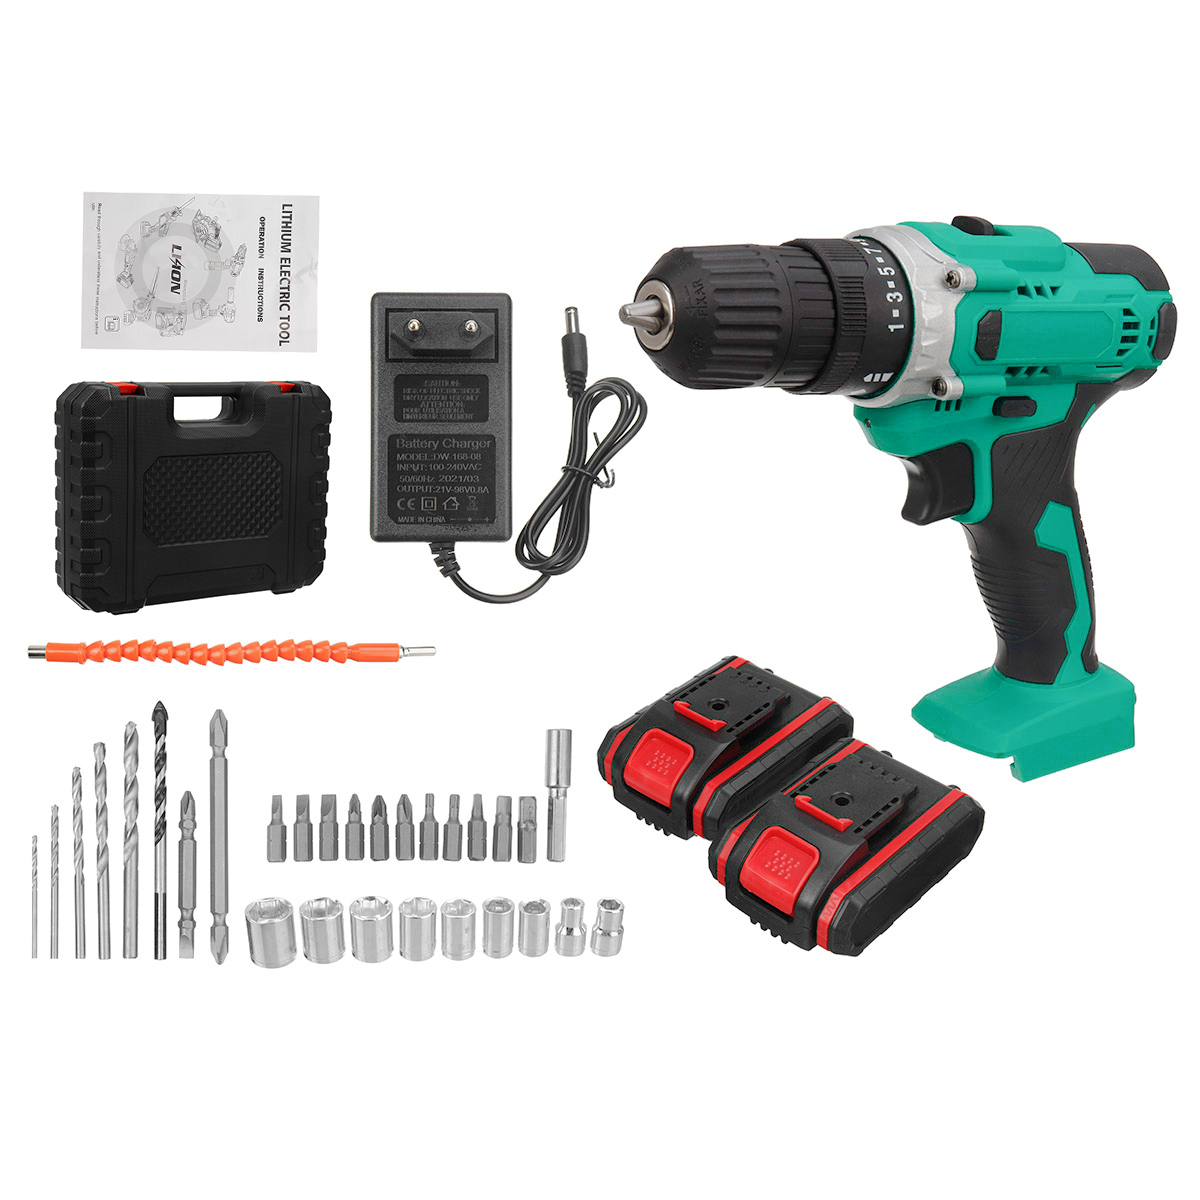 Cordless-Electric-Drill-Rechargeable-Drill-Screwdriver-Power-Tool-LED-W-12pcs-Battery-1847803-10